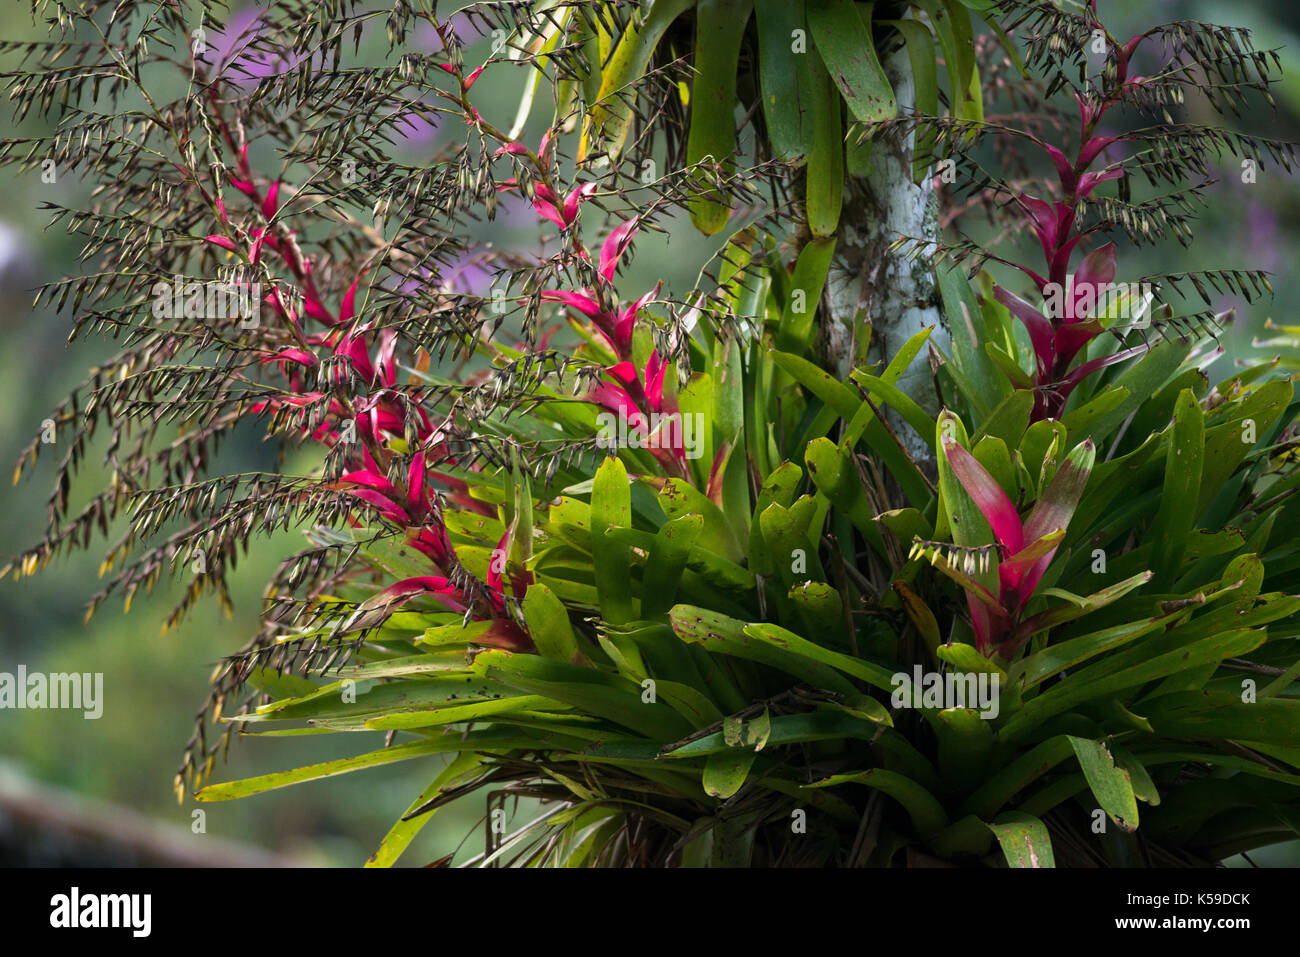 Flowering epiphytic bromeliads growing on a tree in the Atlantic Rainforest of SE Brazil Stock Photo